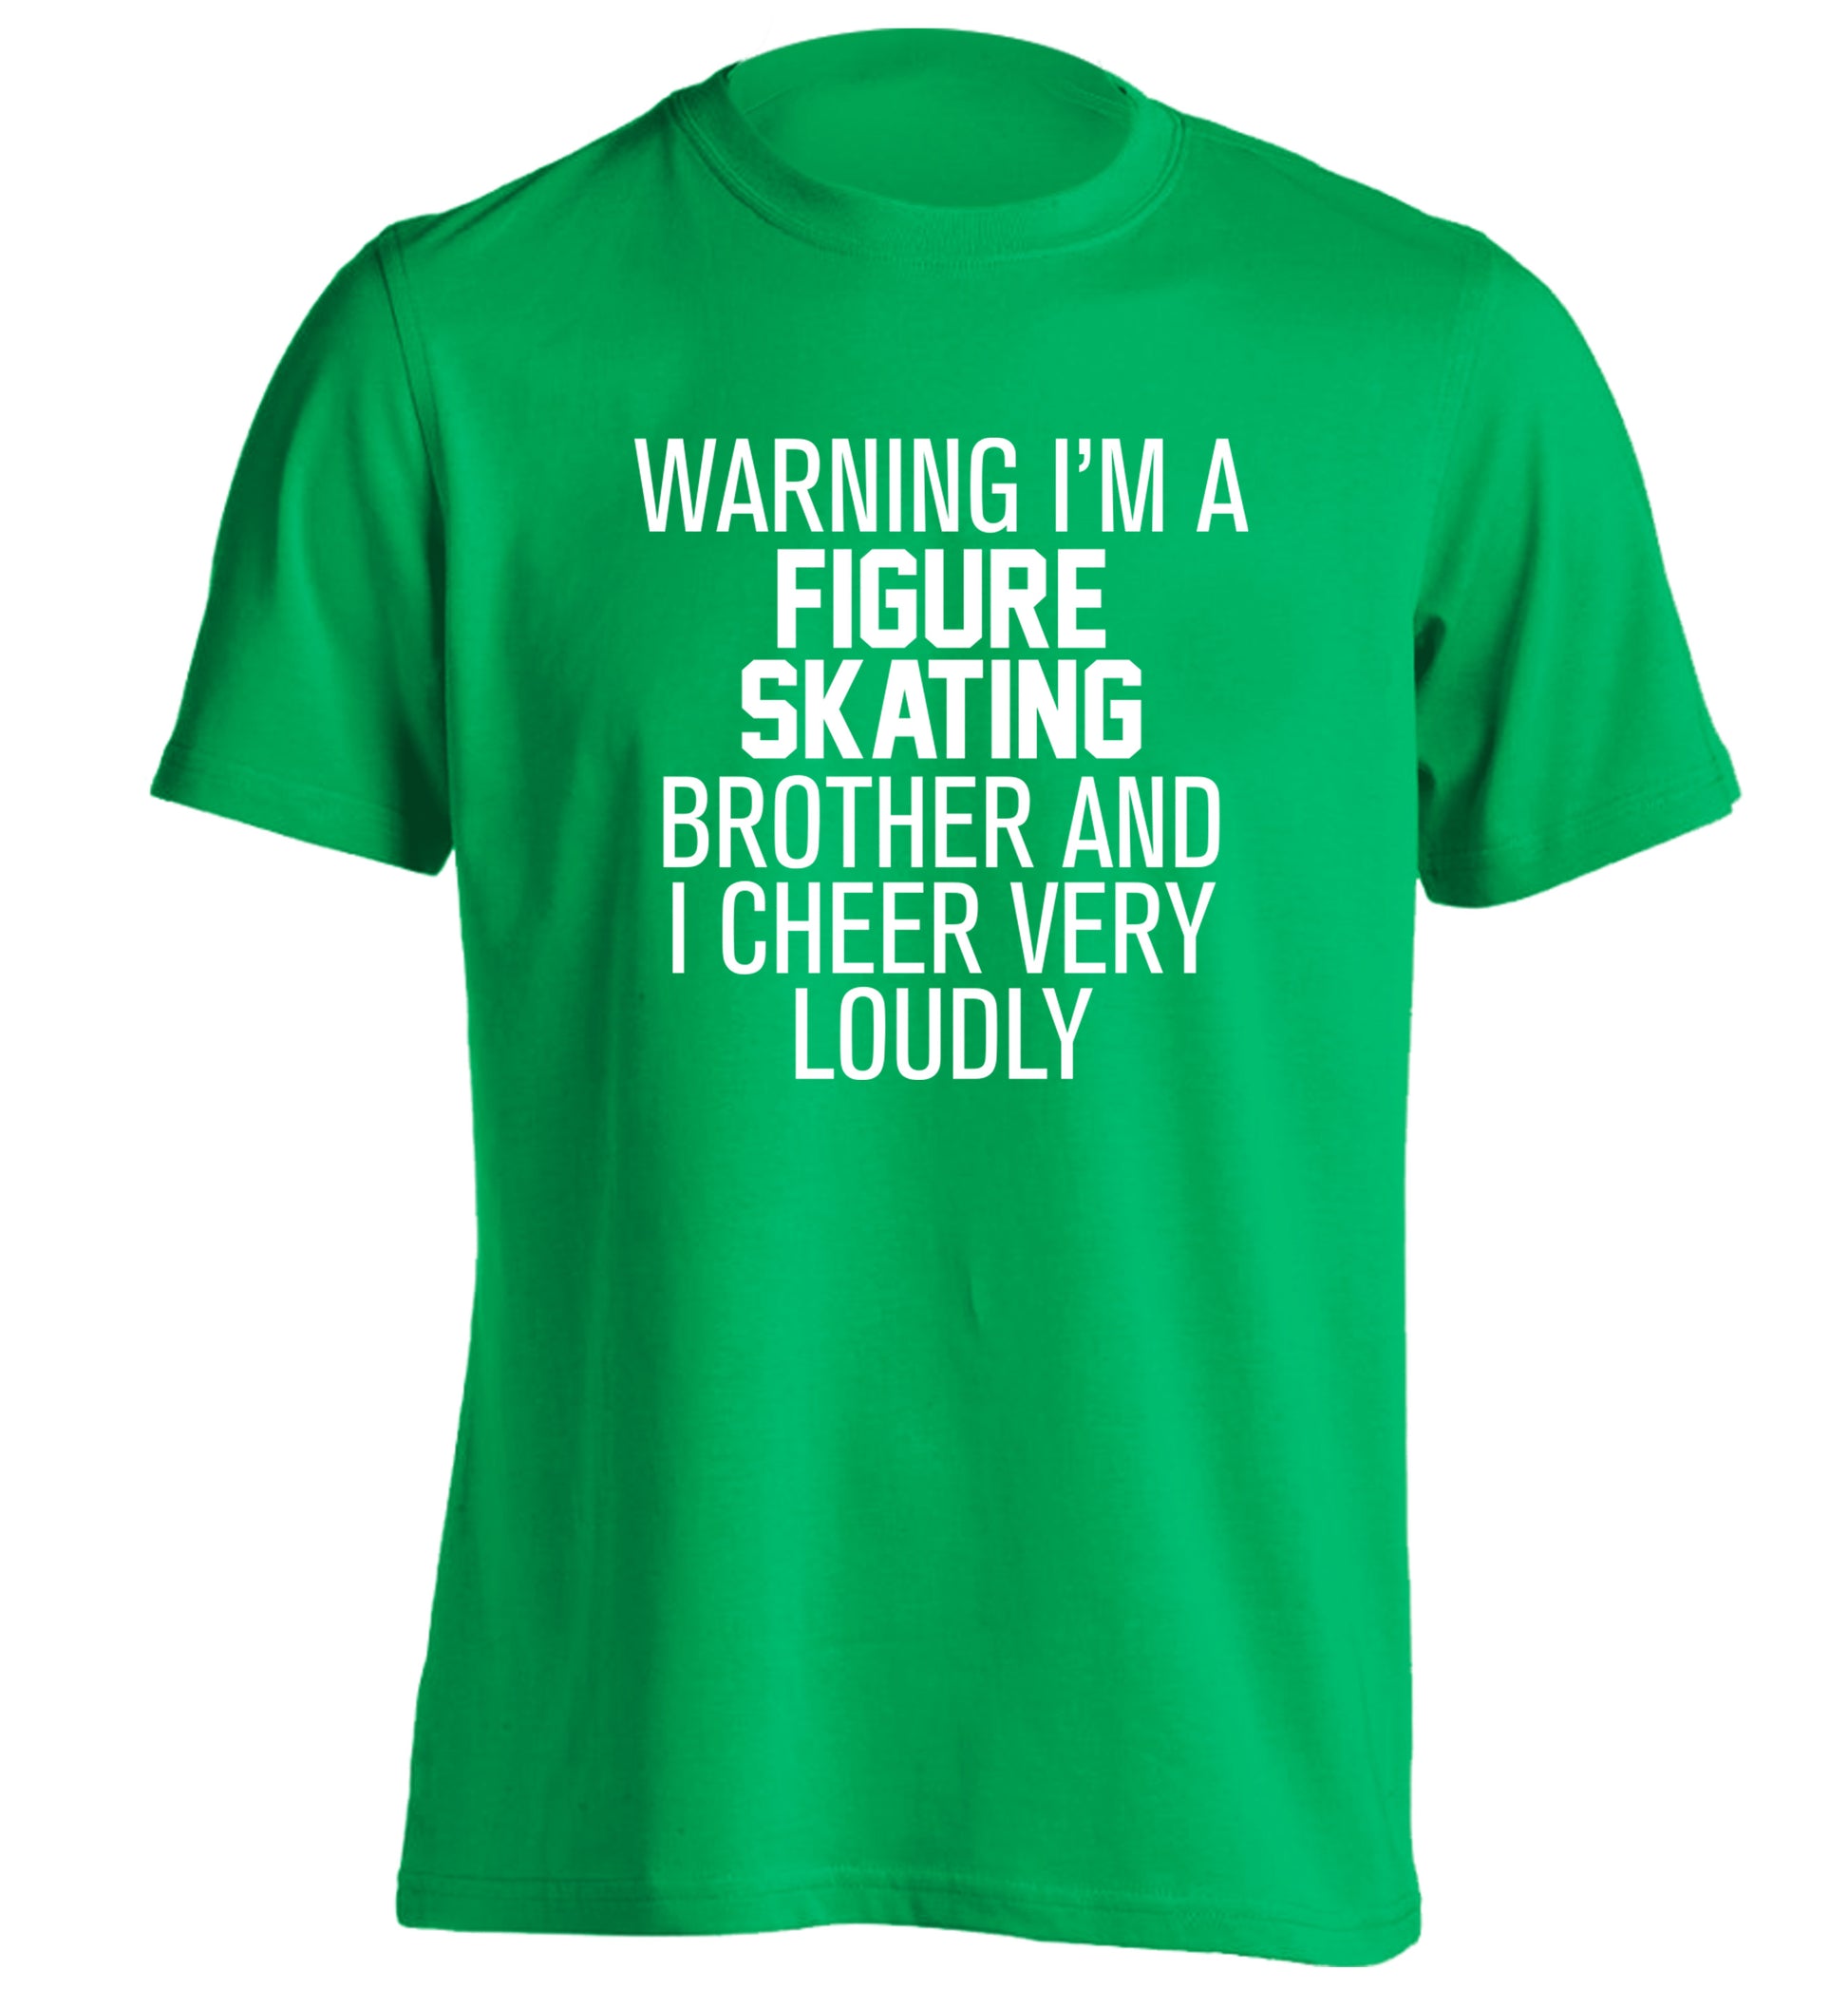 Warning I'm a figure skating brother and I cheer very loudly adults unisexgreen Tshirt 2XL